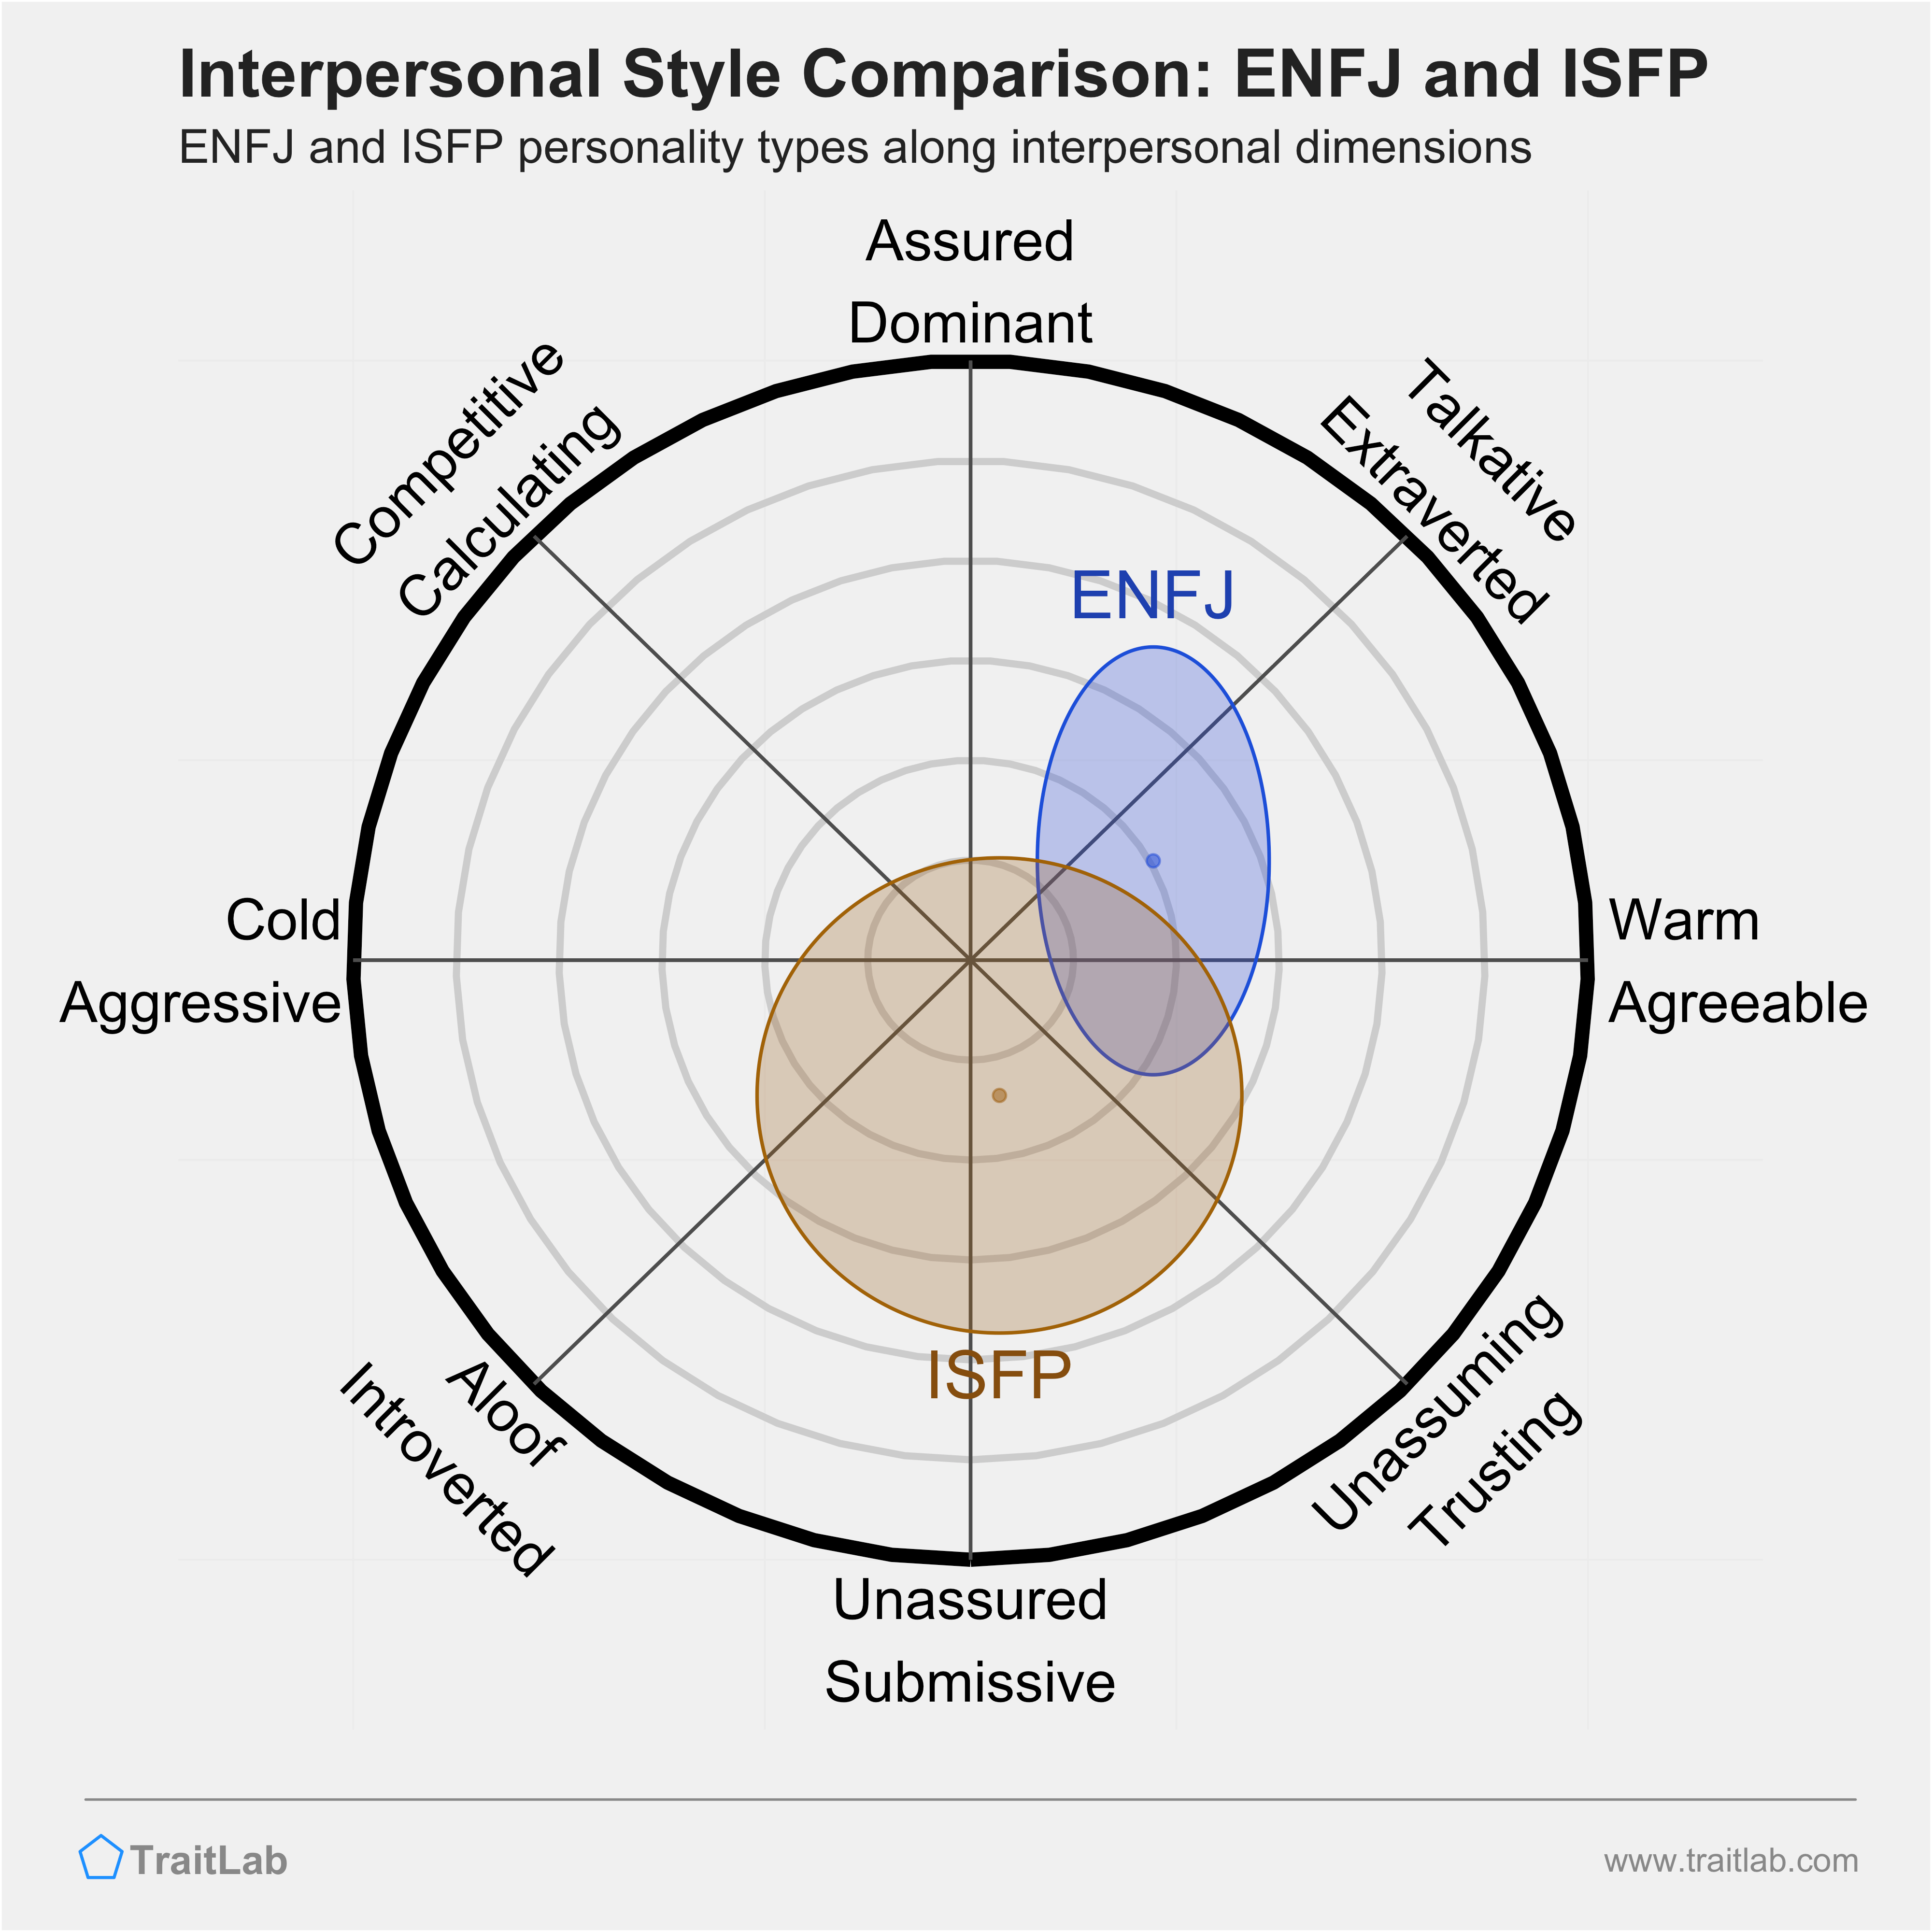 ENFJ and ISFP comparison across interpersonal dimensions